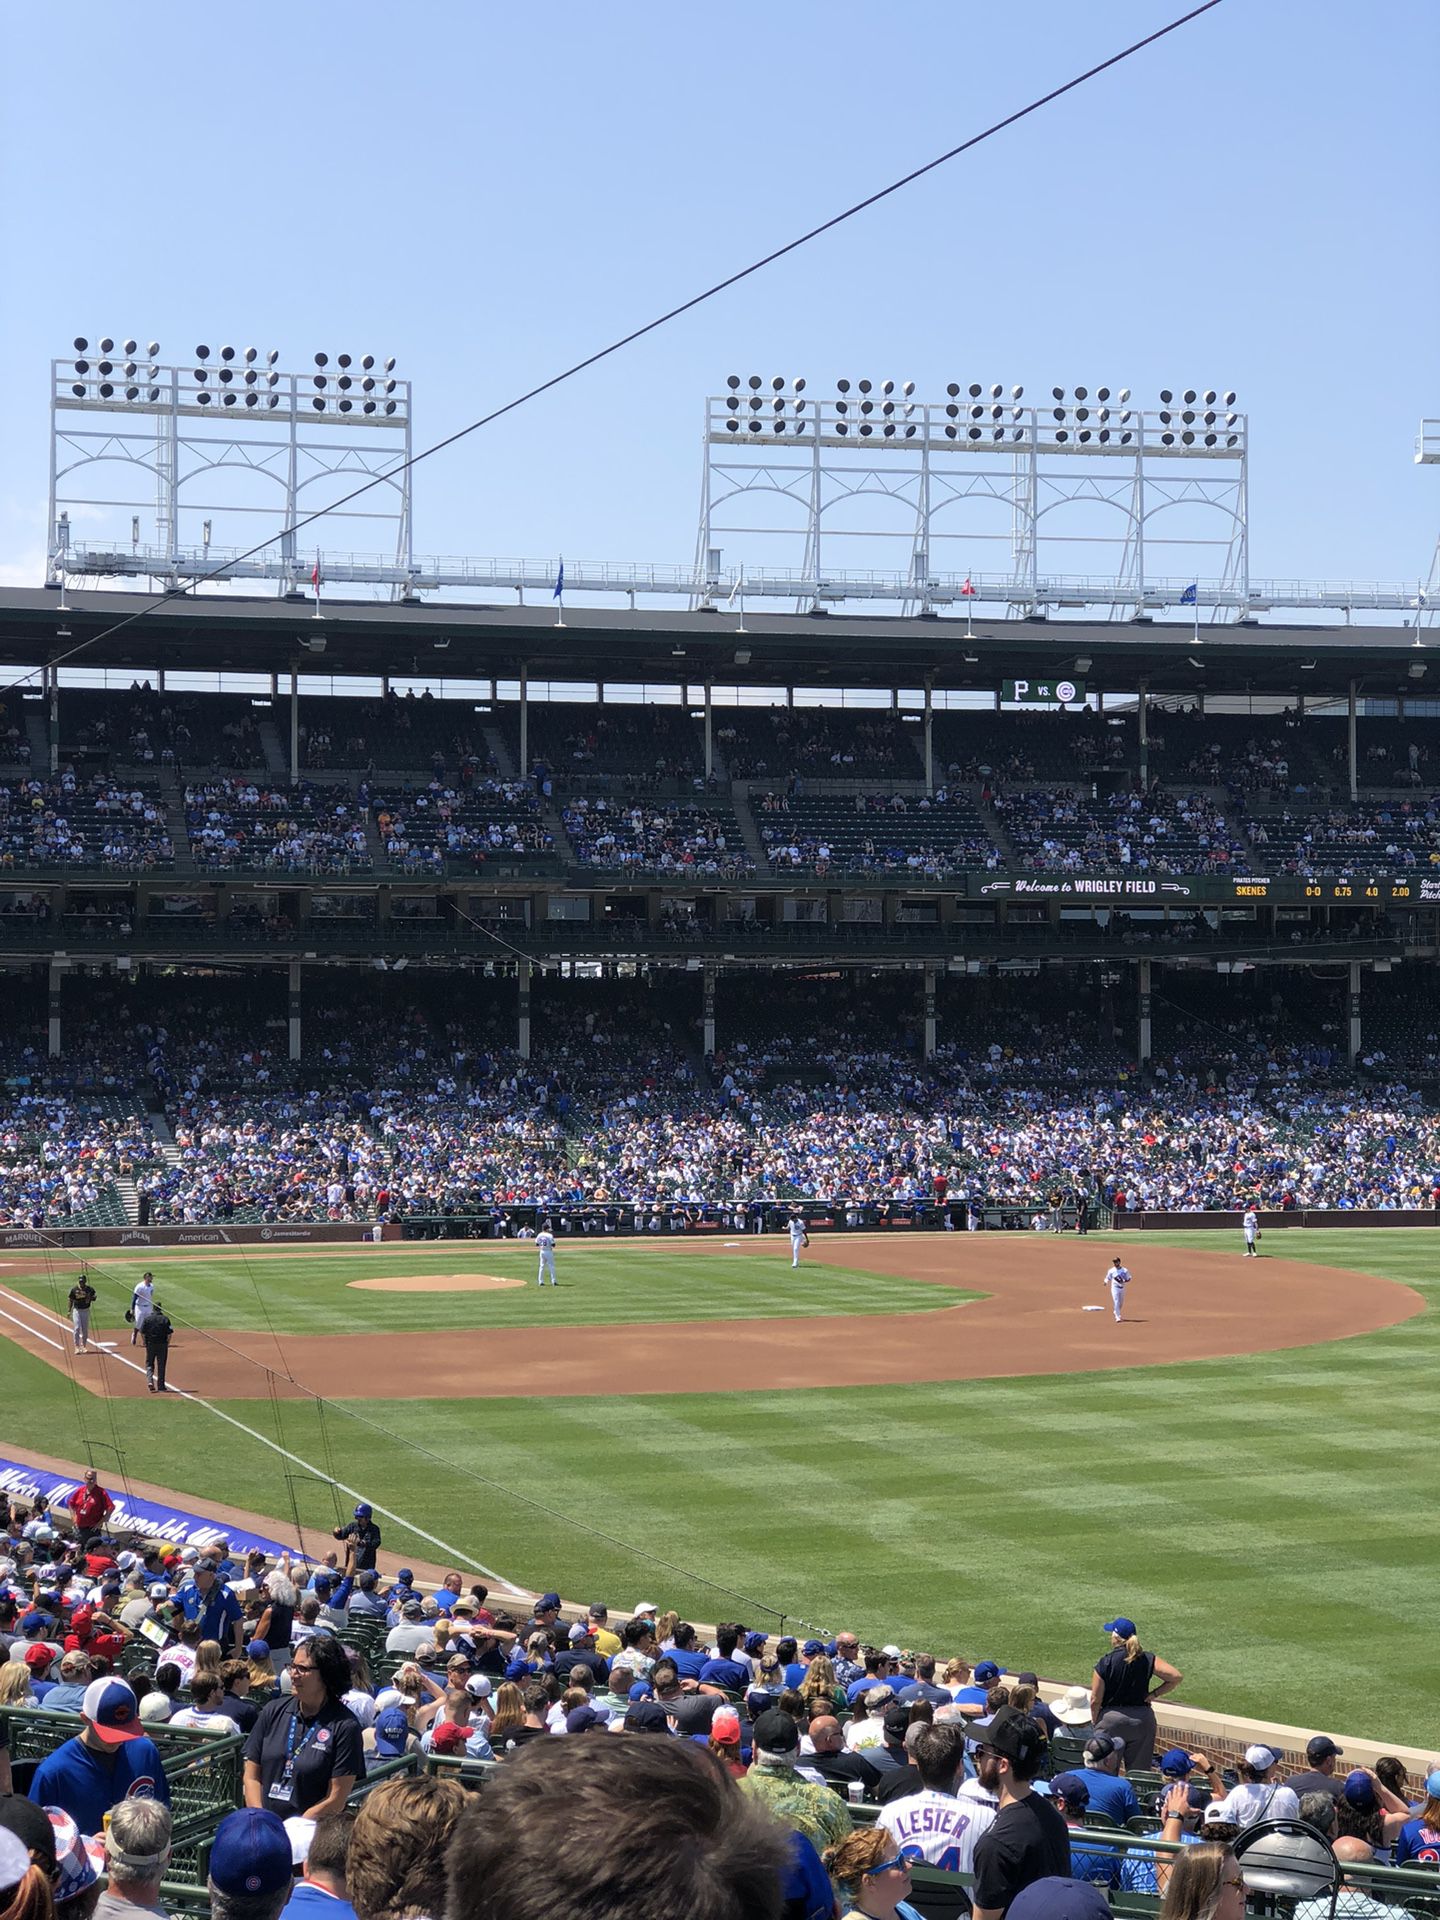 Cubs Vs Braves Tuesday May 21st. 2 Seats Available 